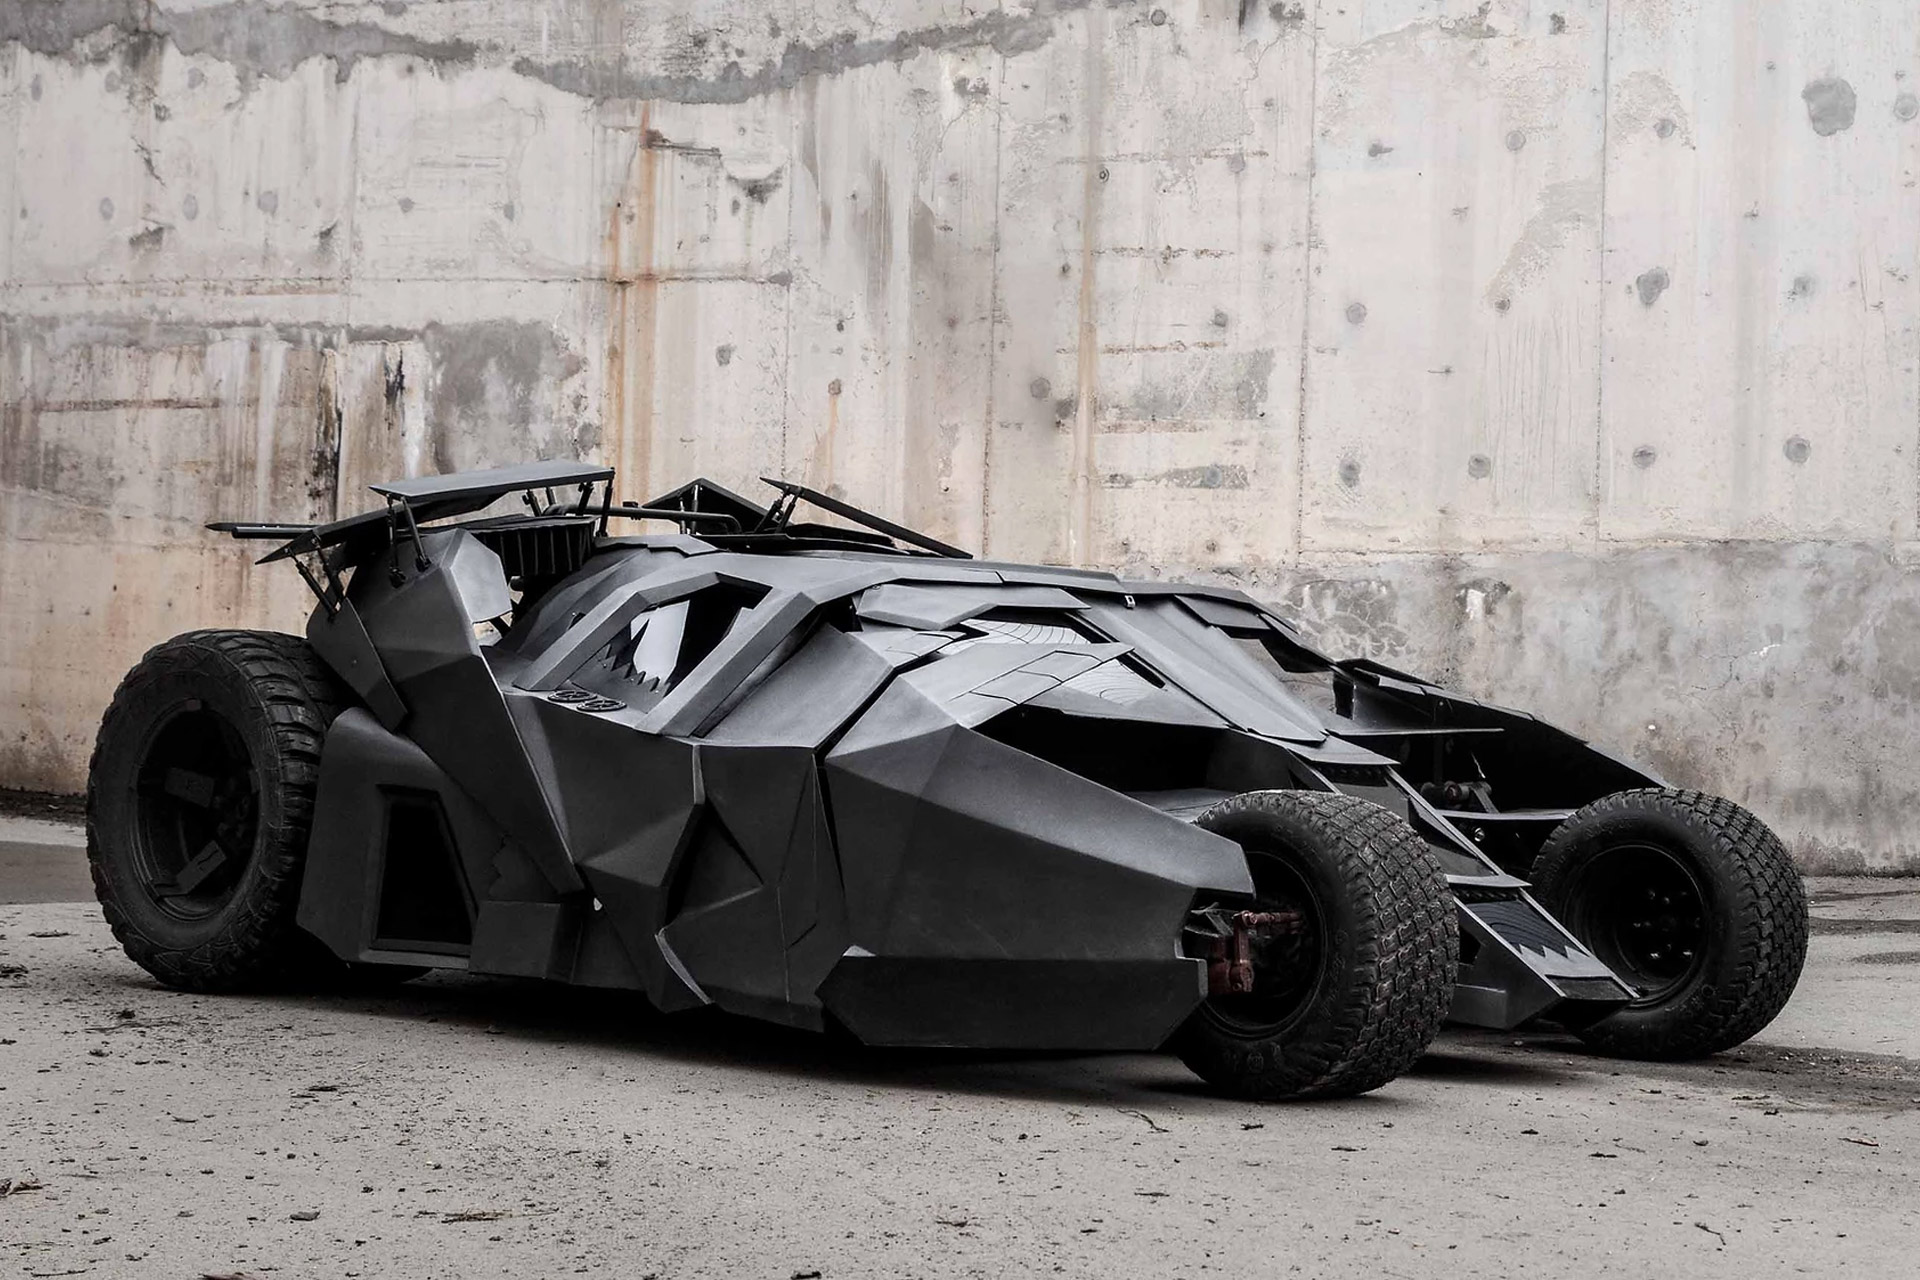 The 'Tumbler' Batmobile is for sale